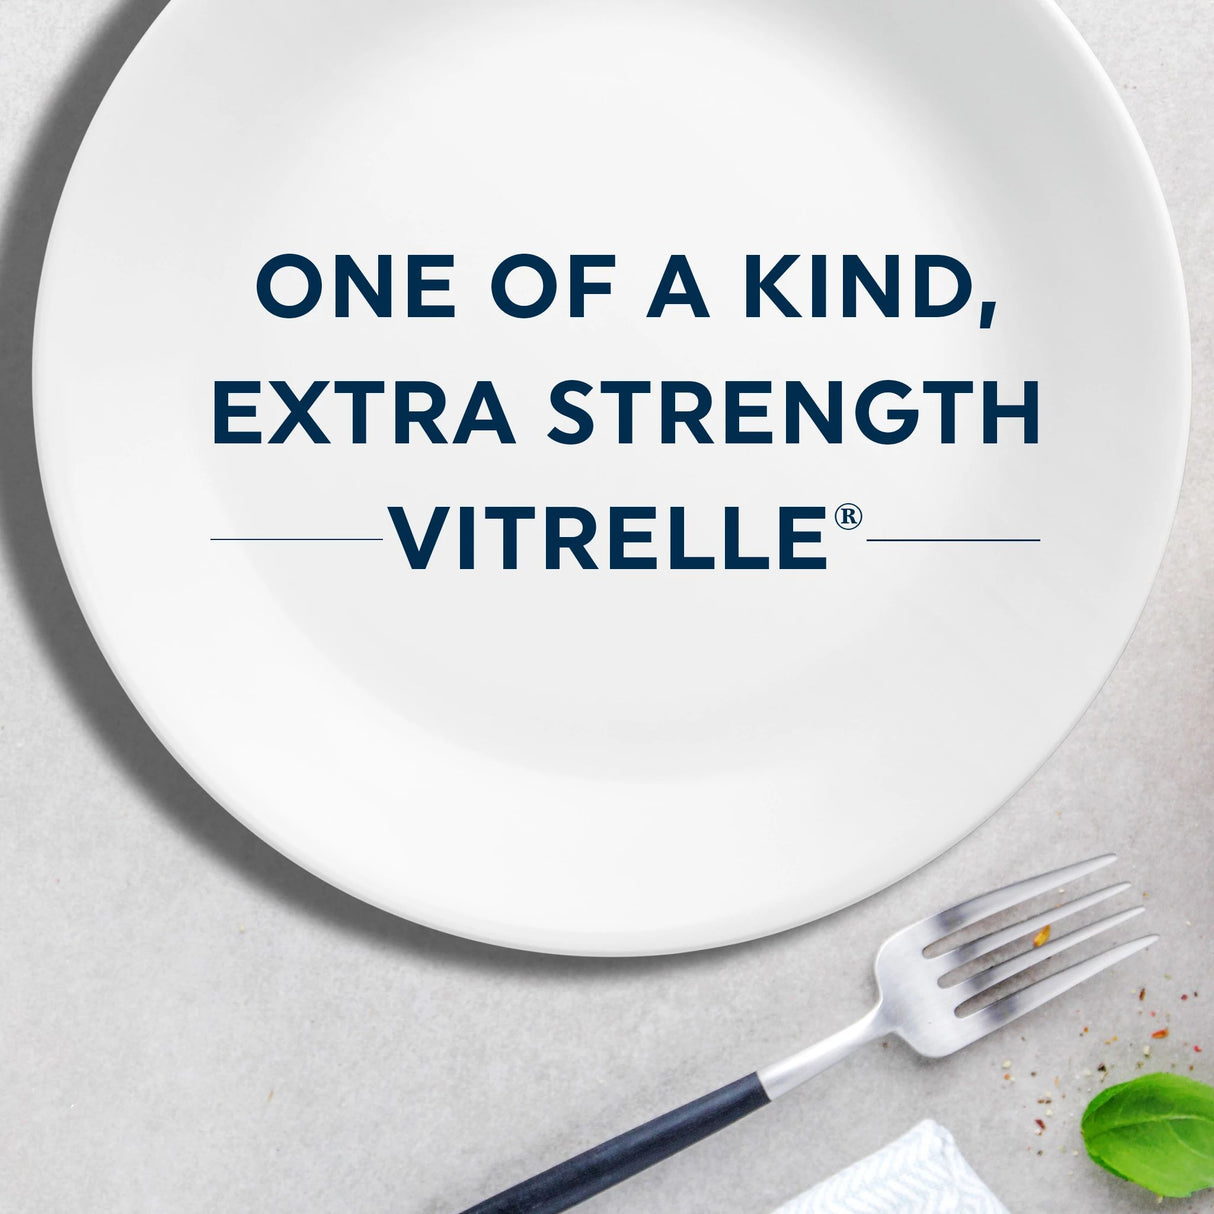  Text that says: One of a Kind, Extra Strength Vitrelle